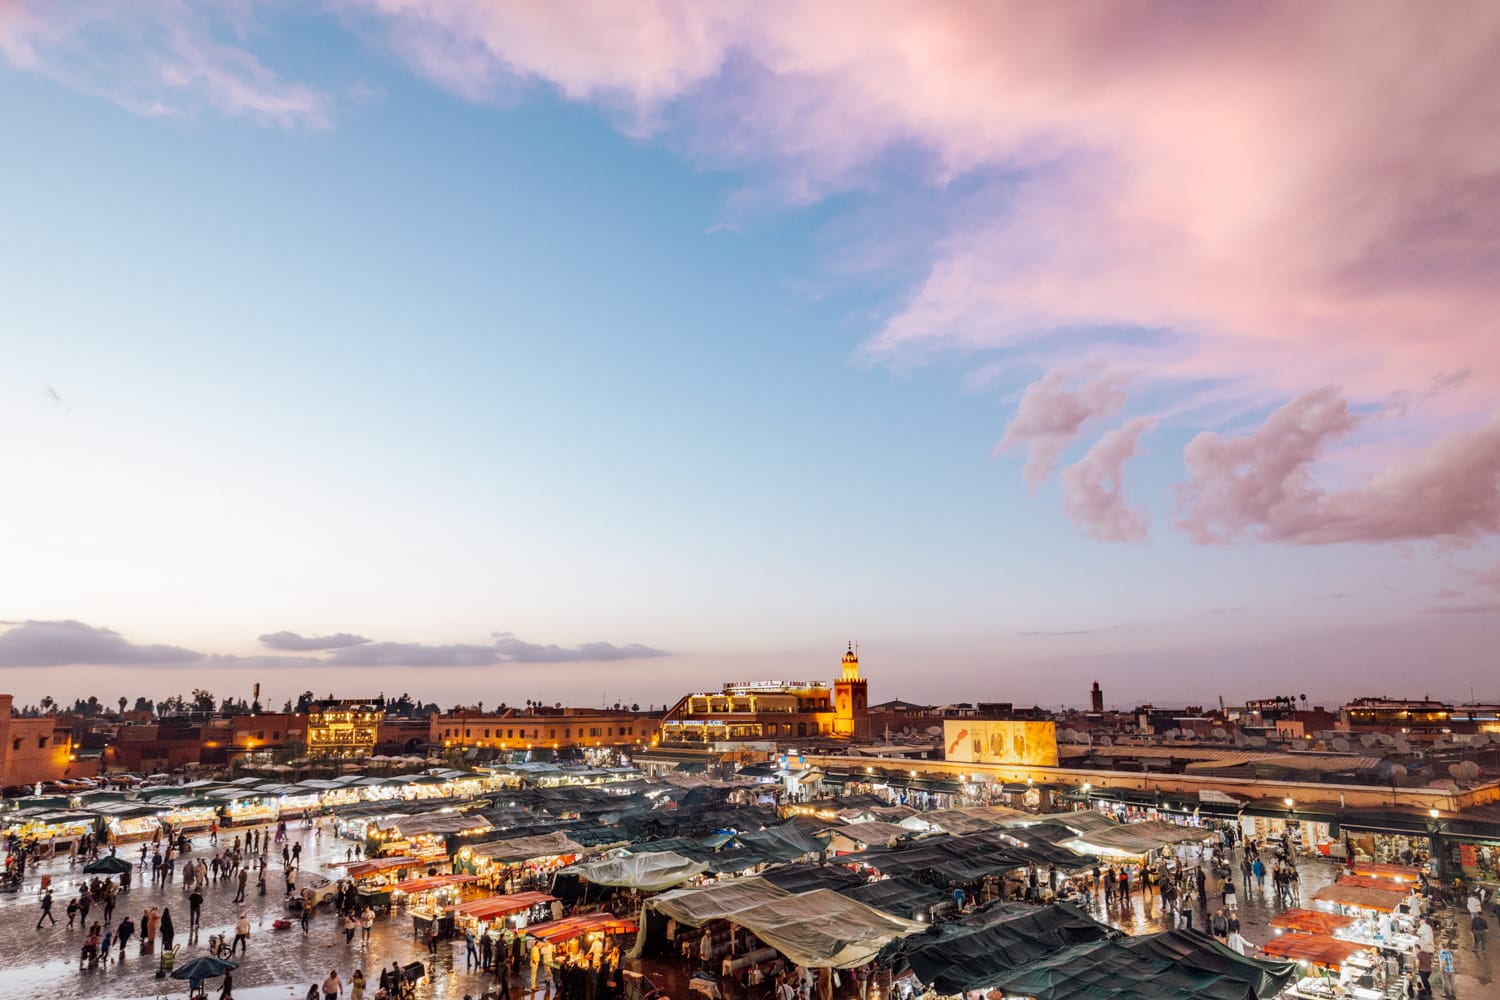 How best to experience magical Jemaa el Fna in Marrakech